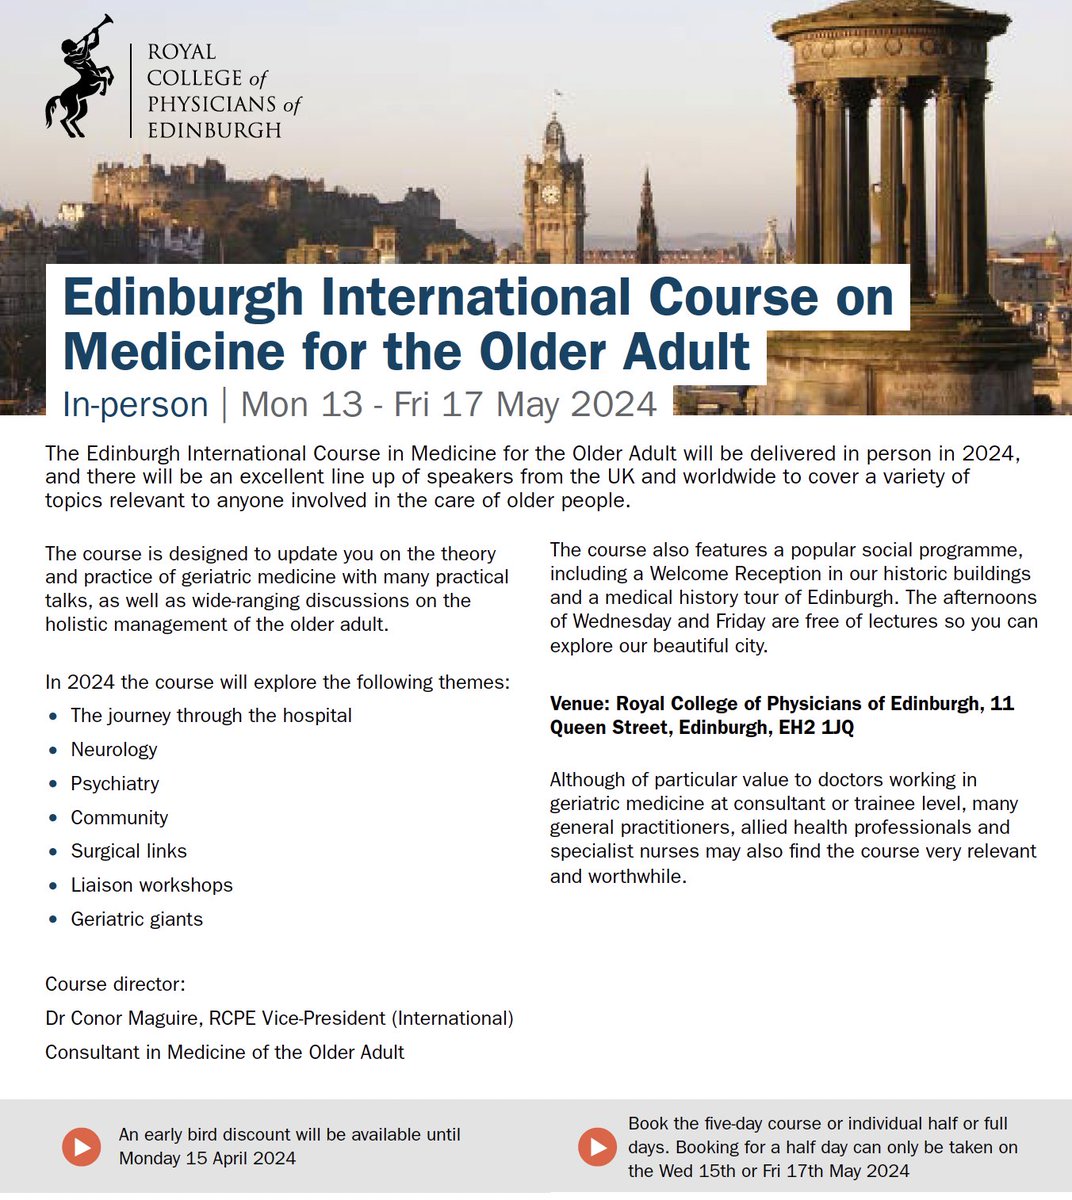 This will be the third time I've spoke at this excellent event @RCPEdin - really looking forward to it - well worth a look if interested in building/updating expertise in care of older people events.rcpe.ac.uk/edinburgh-inte…. @CPJMEdinburgh